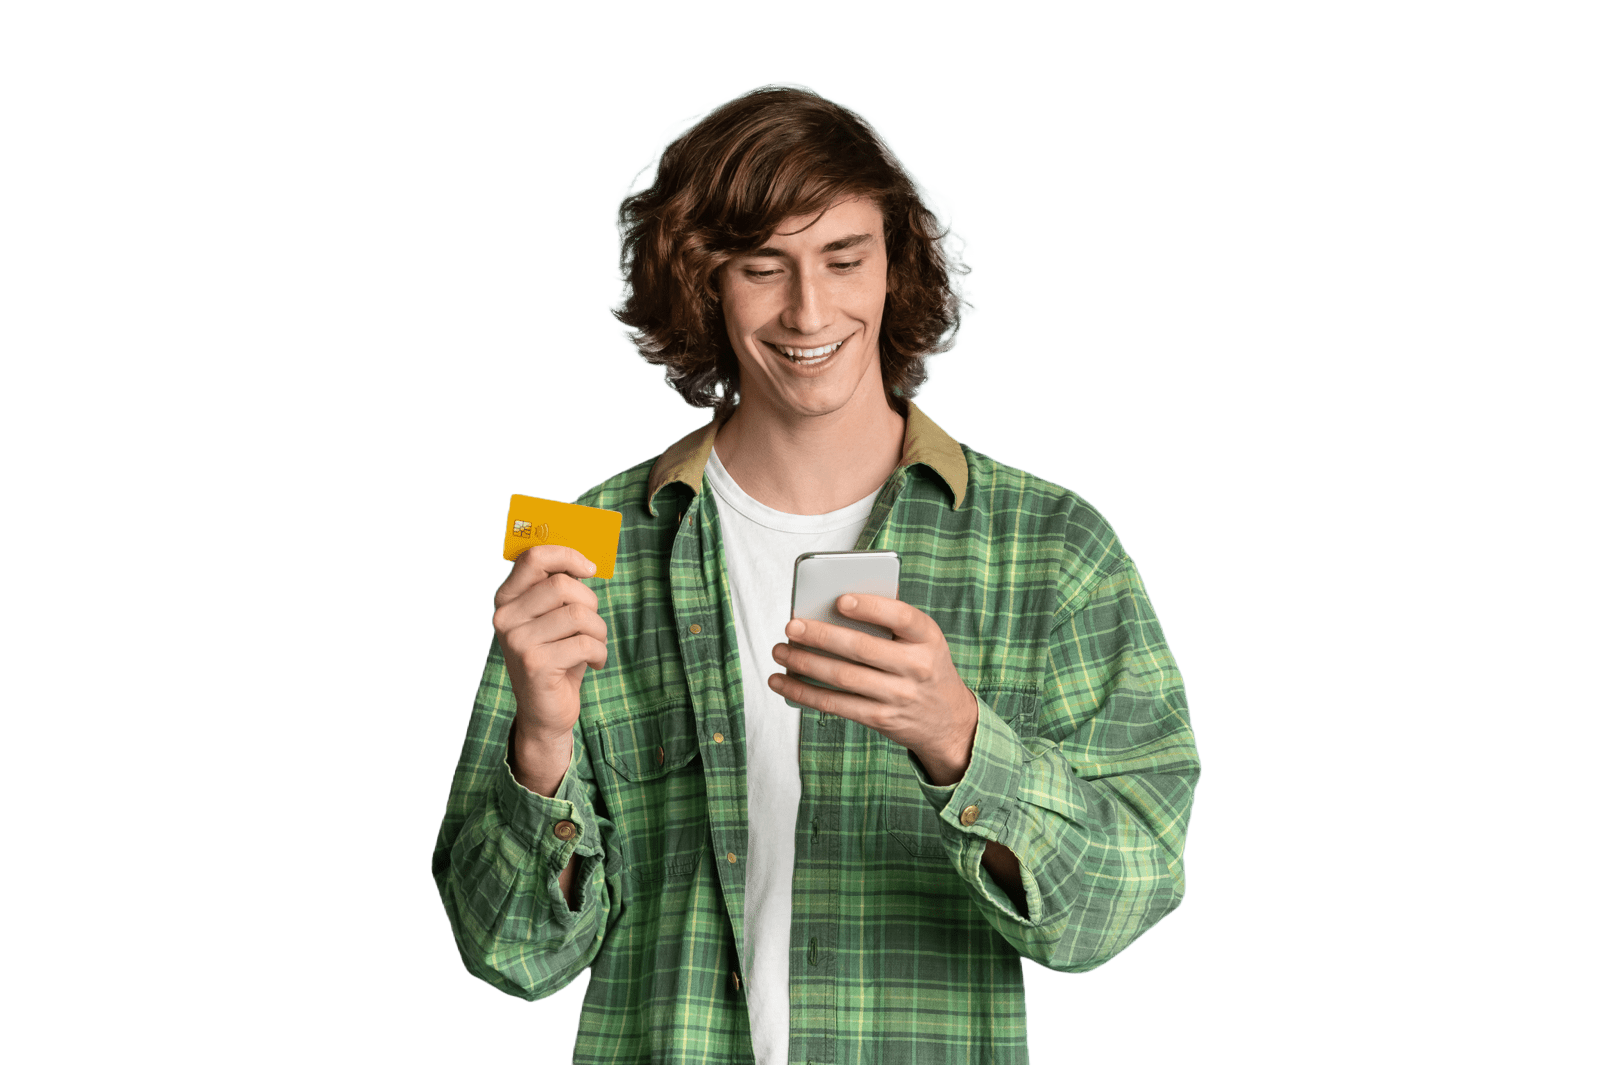 Teenage boy holding a credit card and looking at his cellphone